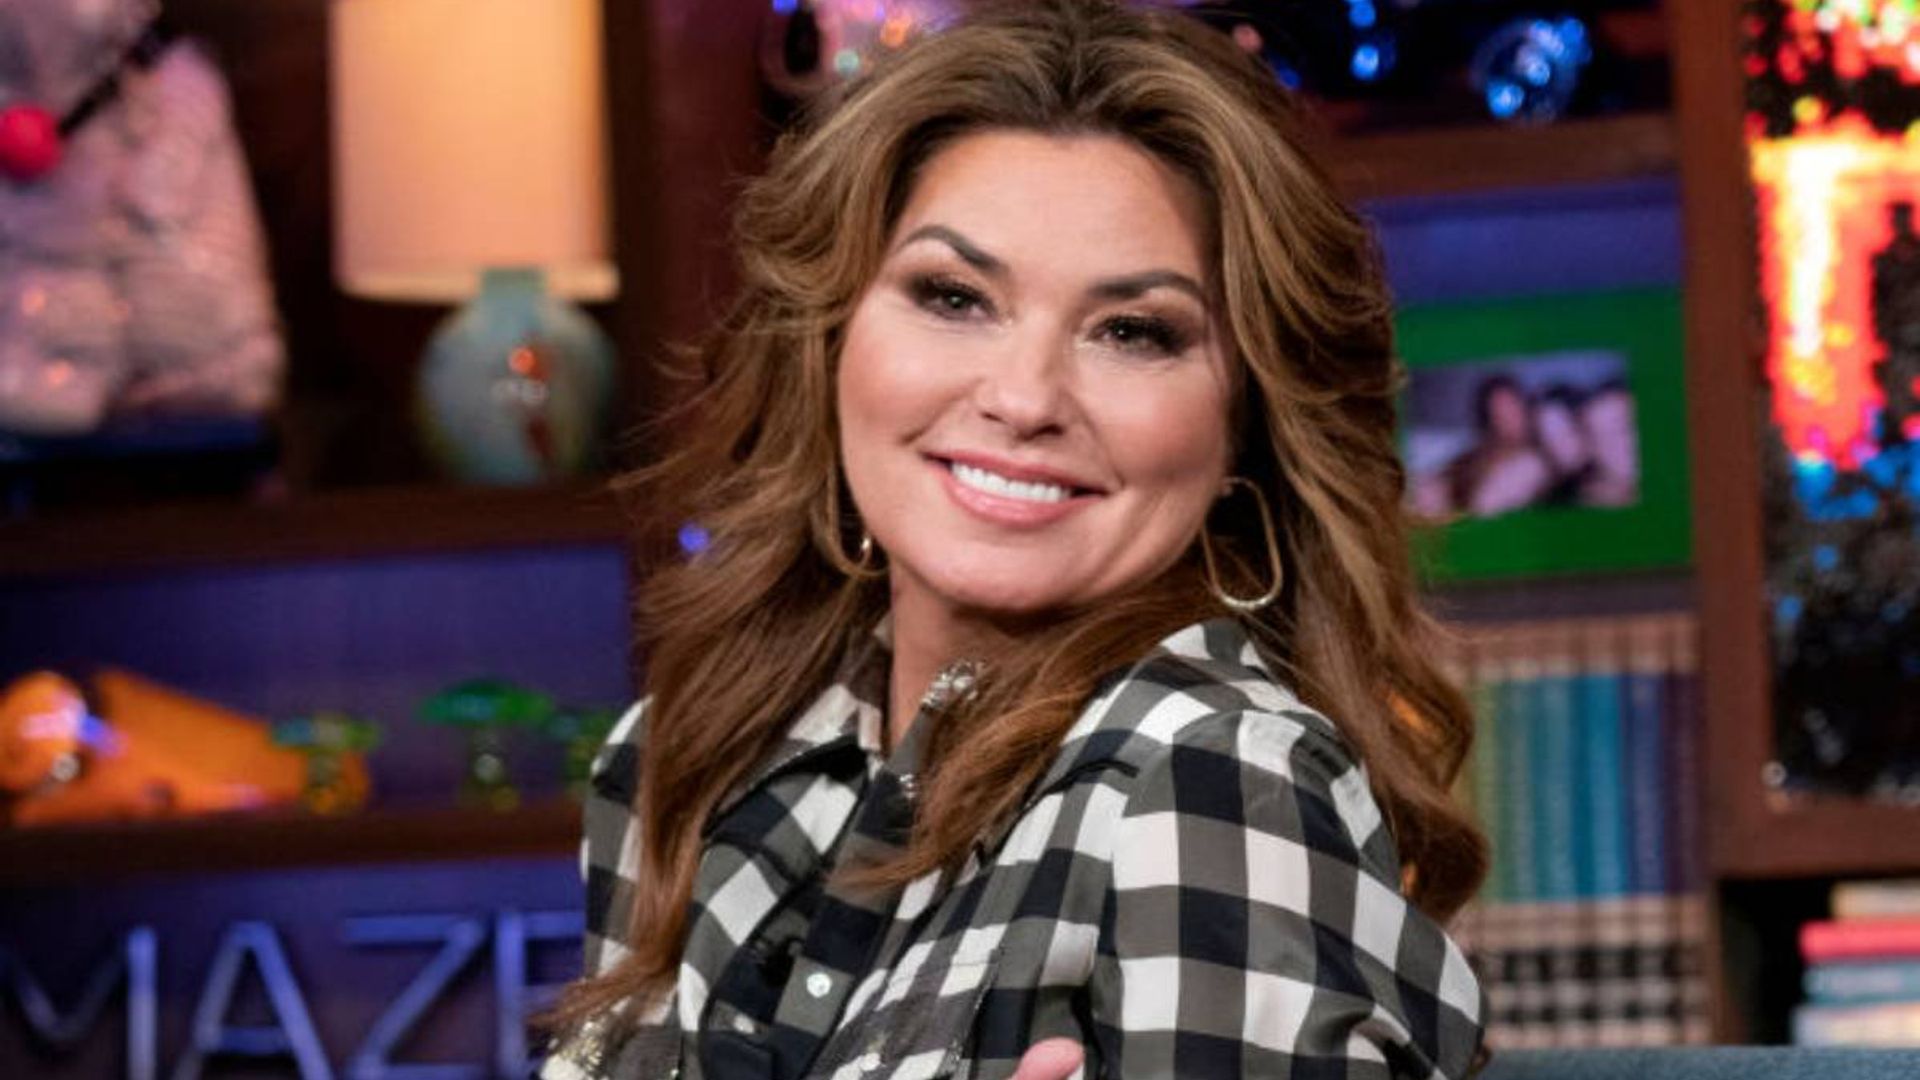 shania-twain-appearance-before-and-after